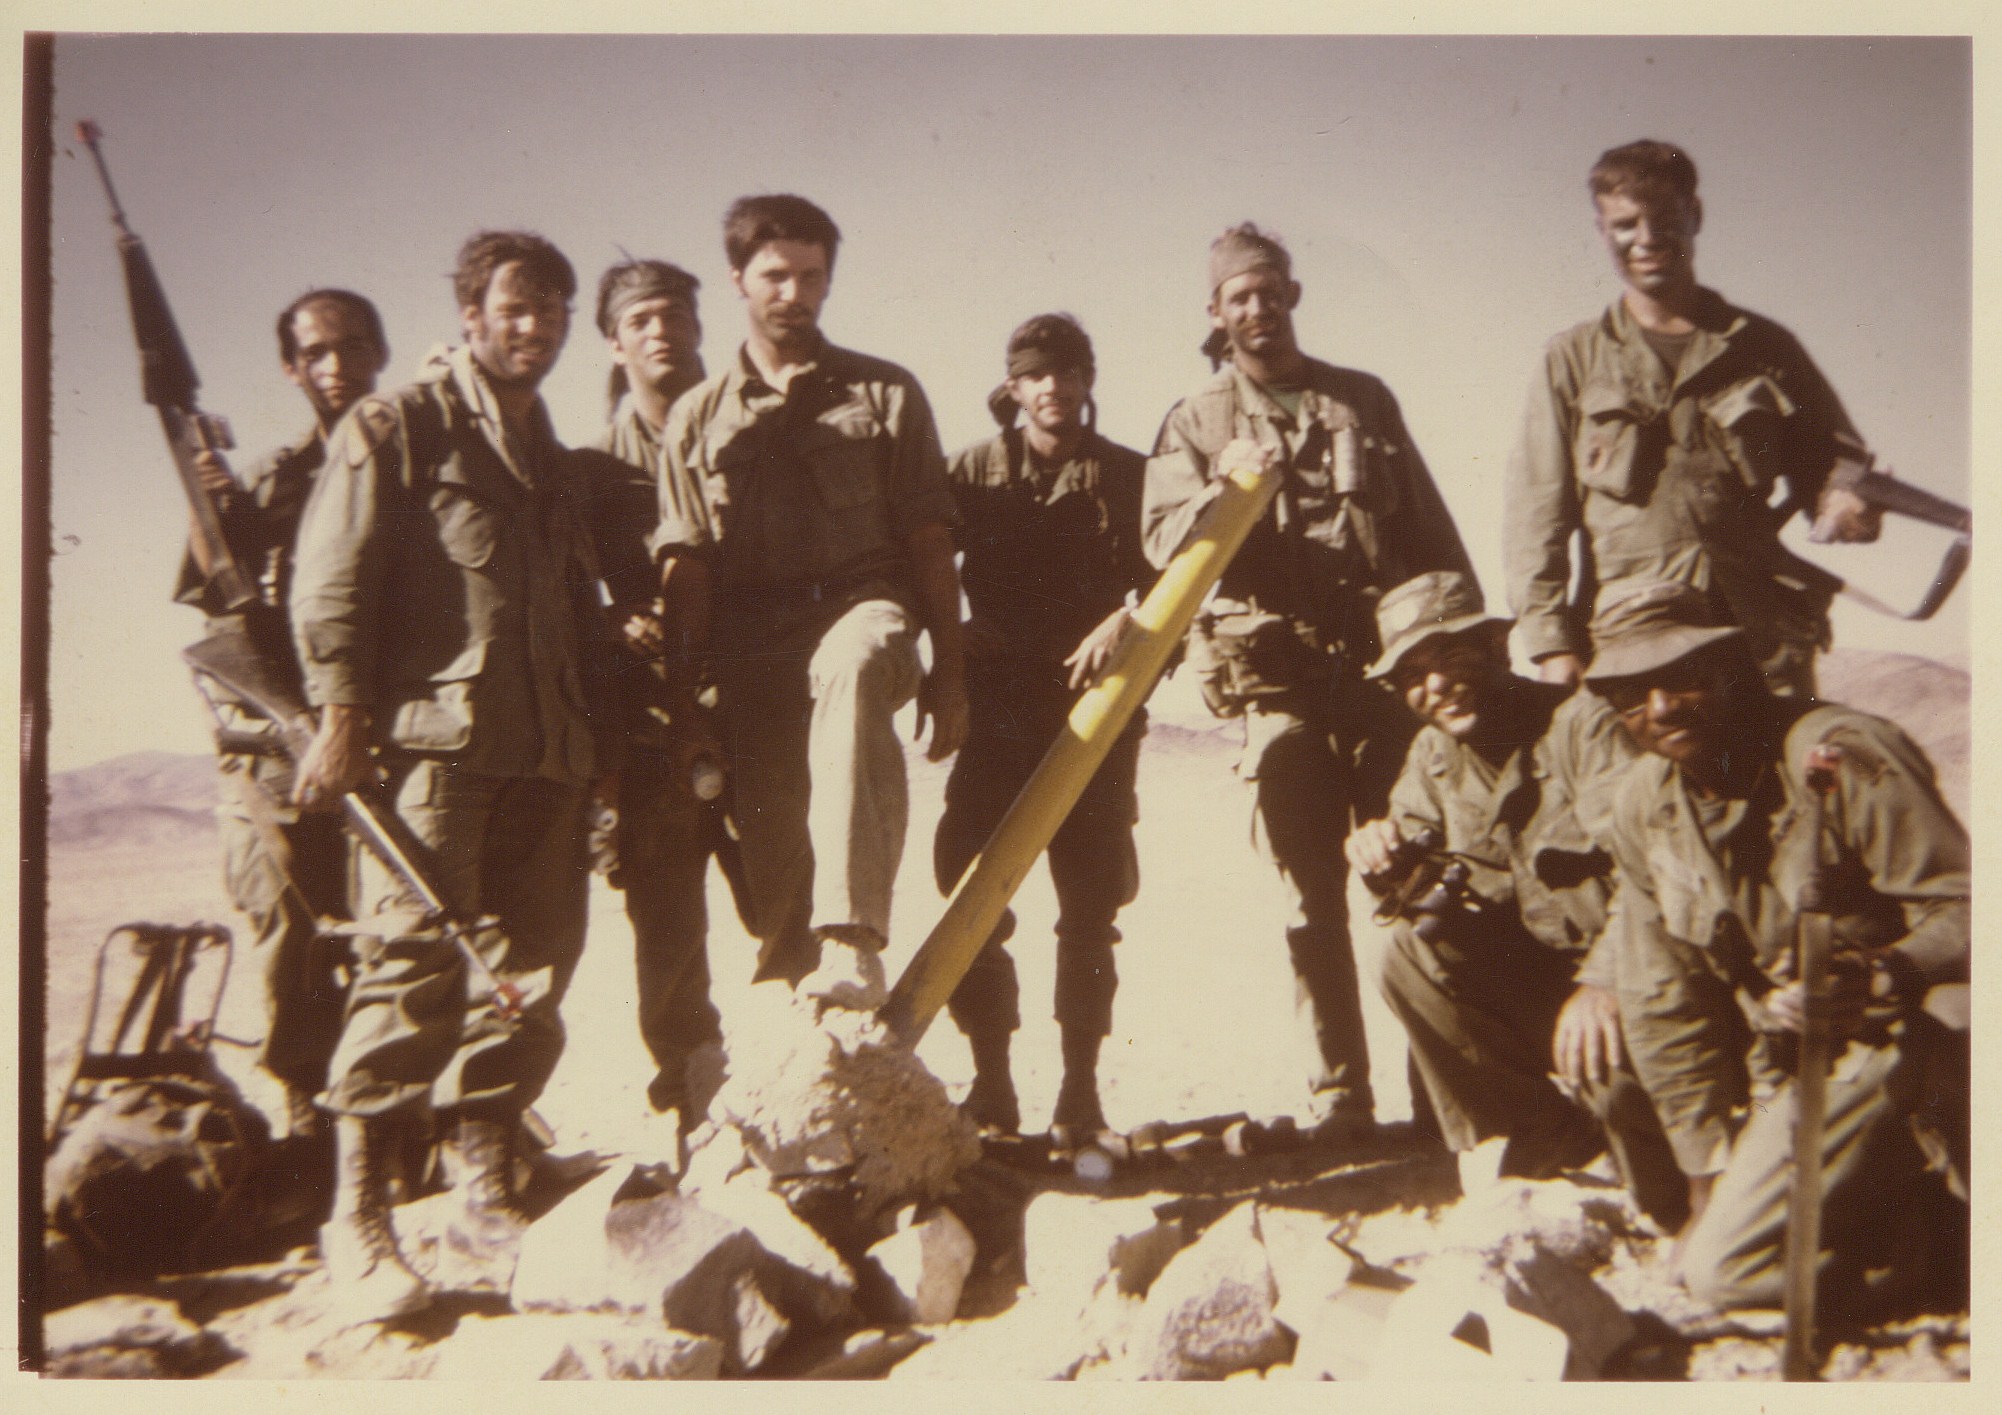 31 A 332 company C 3rd bn 12th special forces group a on desert patrol